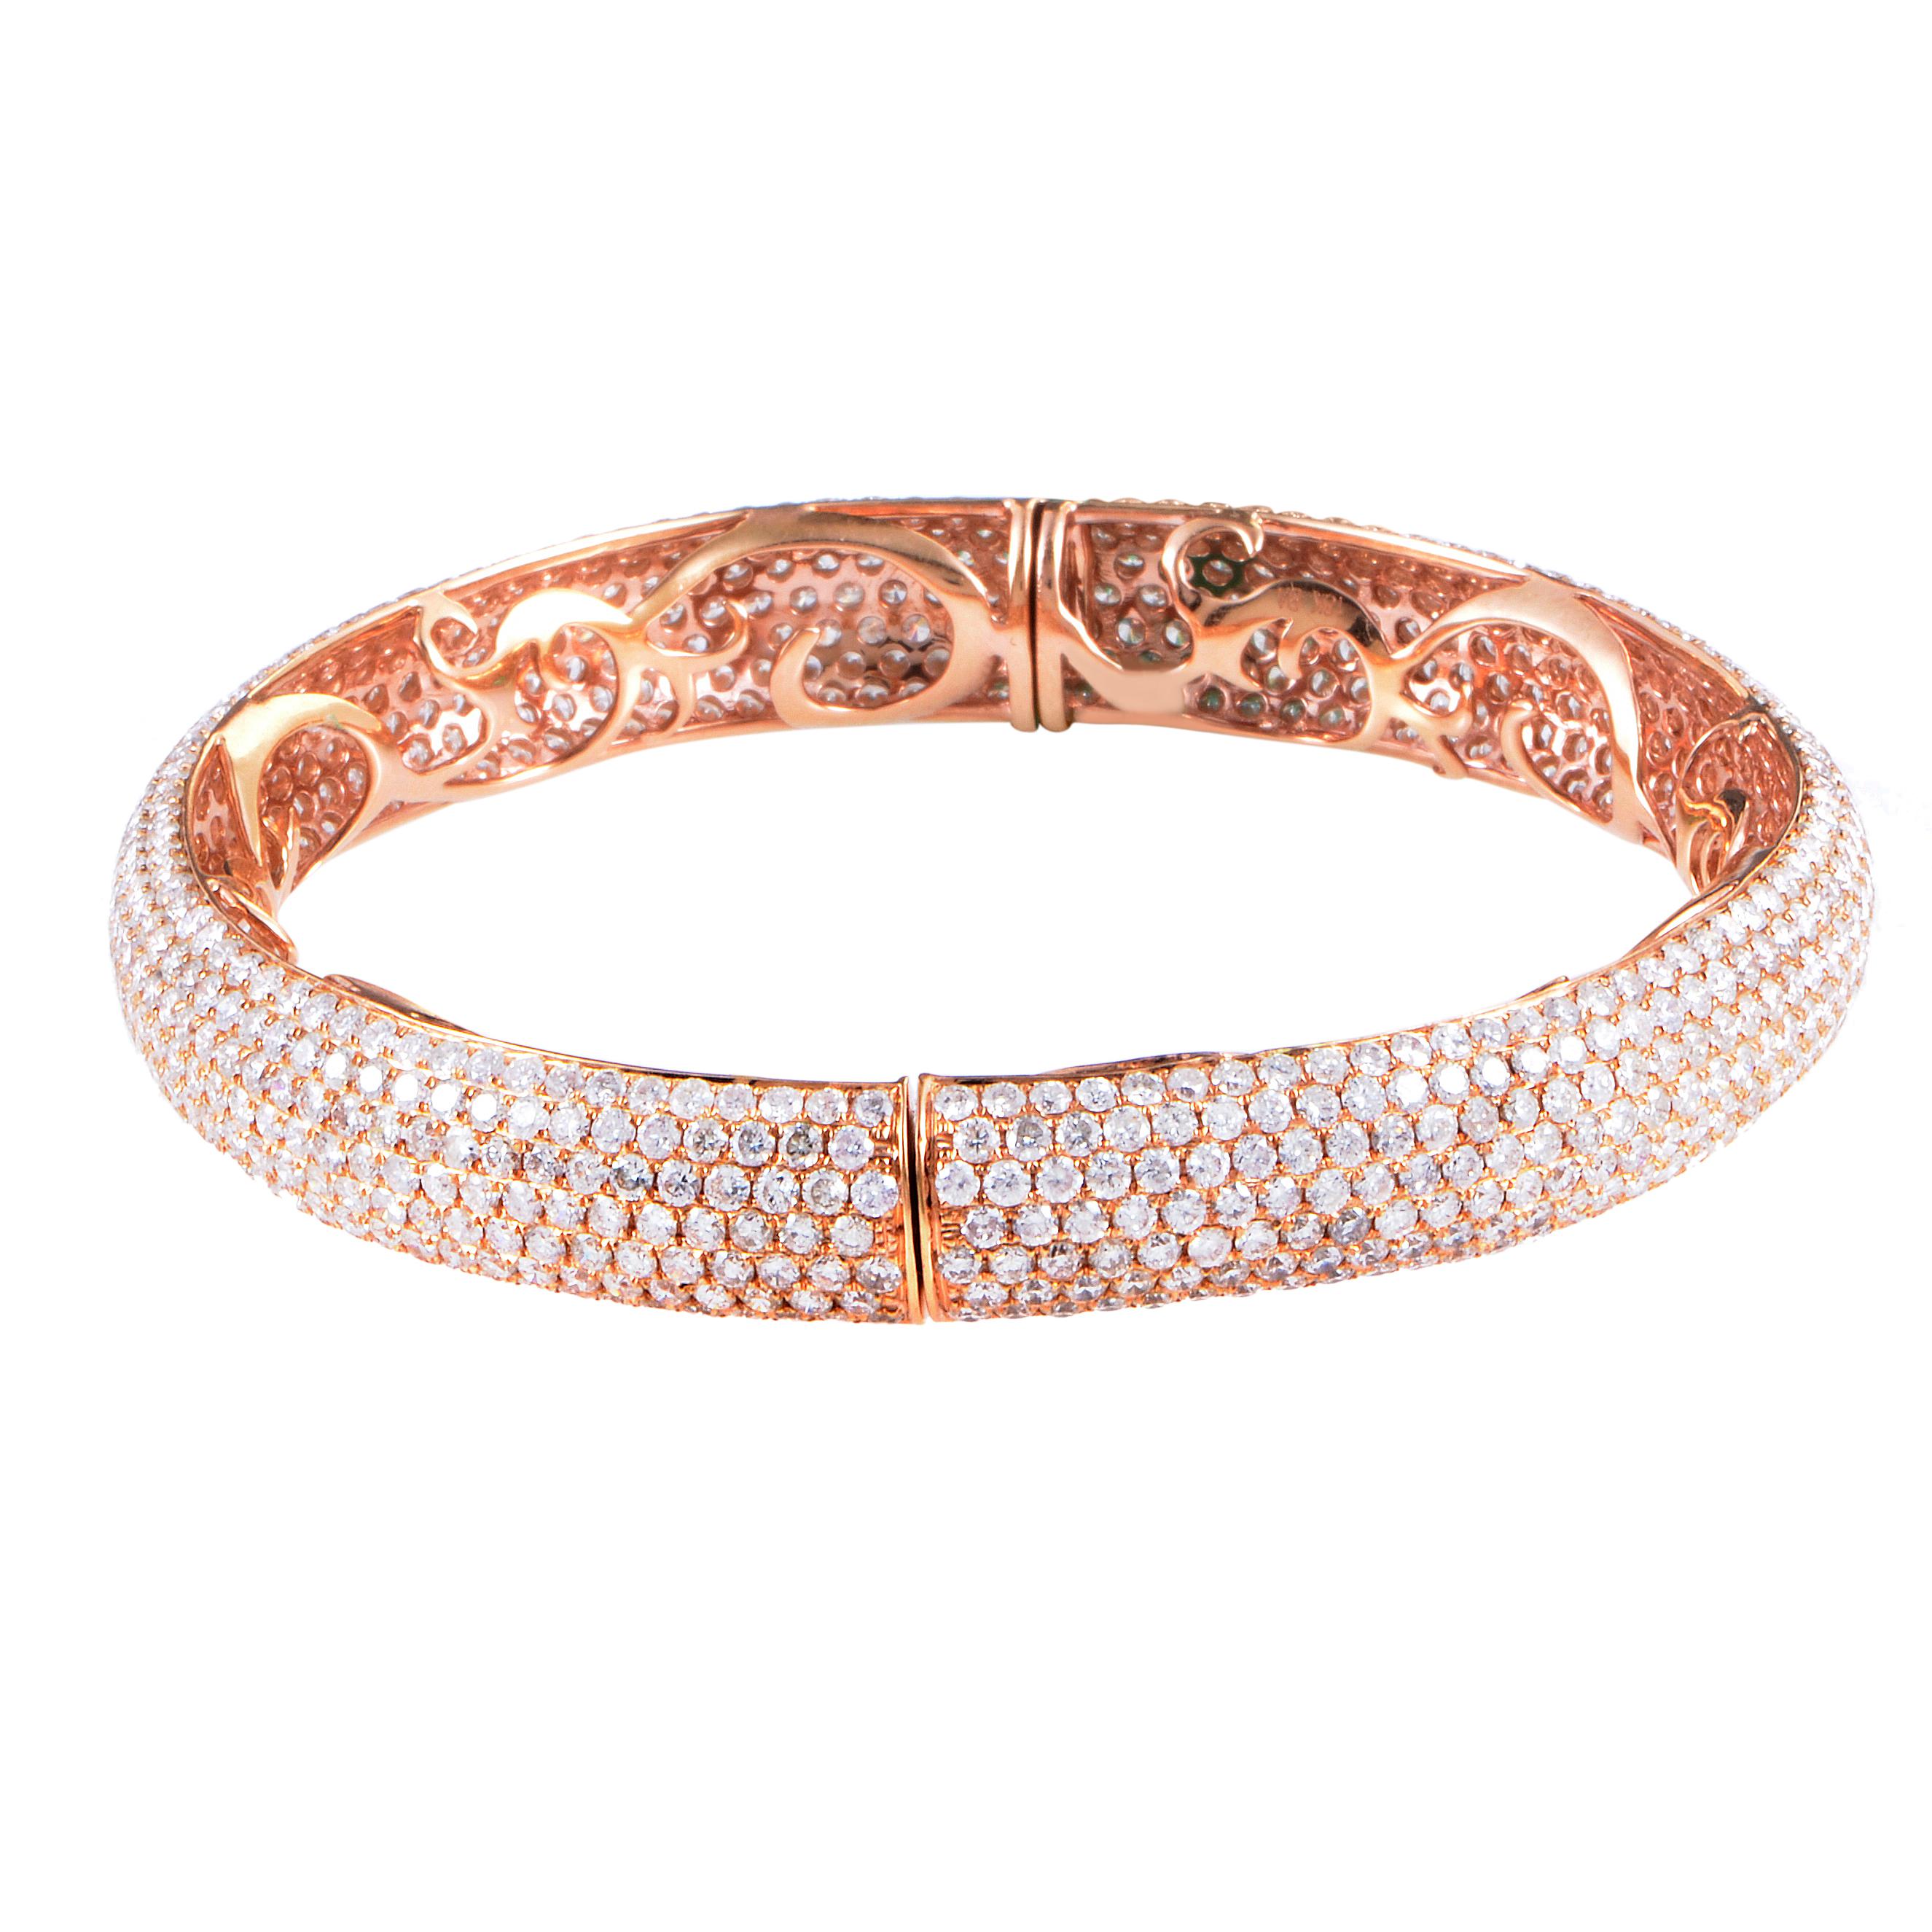 This absolutely gorgeous diamond bracelet is almost magical in its grace and beautiful design. A radiant ~18.80ct of brilliant-cut diamonds pave the exterior of the glamorous 18K rose gold, while the delicately engraved inside captivates with it